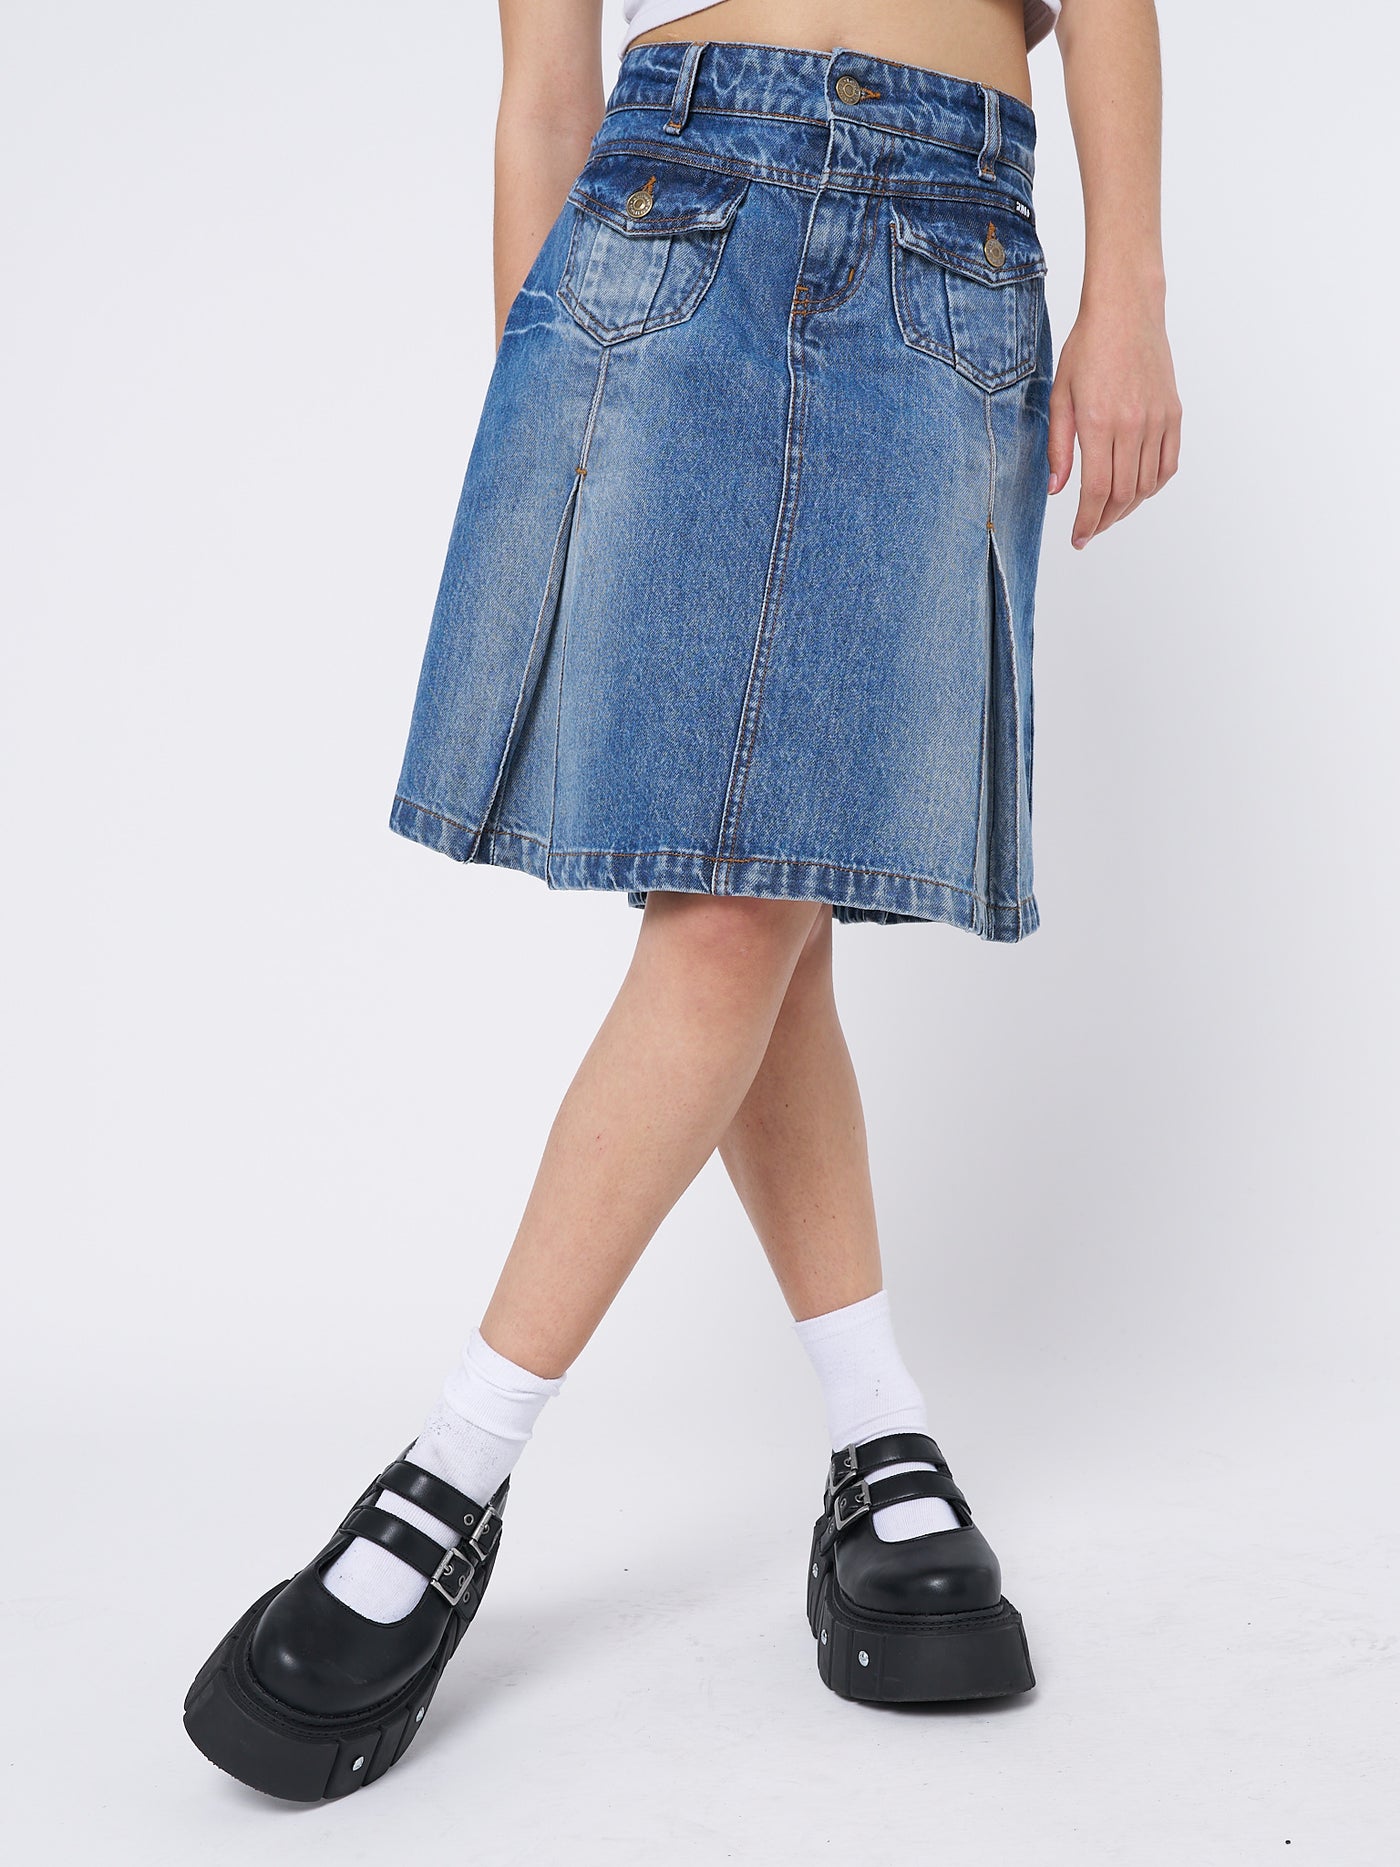  Denim pleated midi skirt by Minga London. Flared silhouette with a blue wash. Versatile and stylish for various occasions.